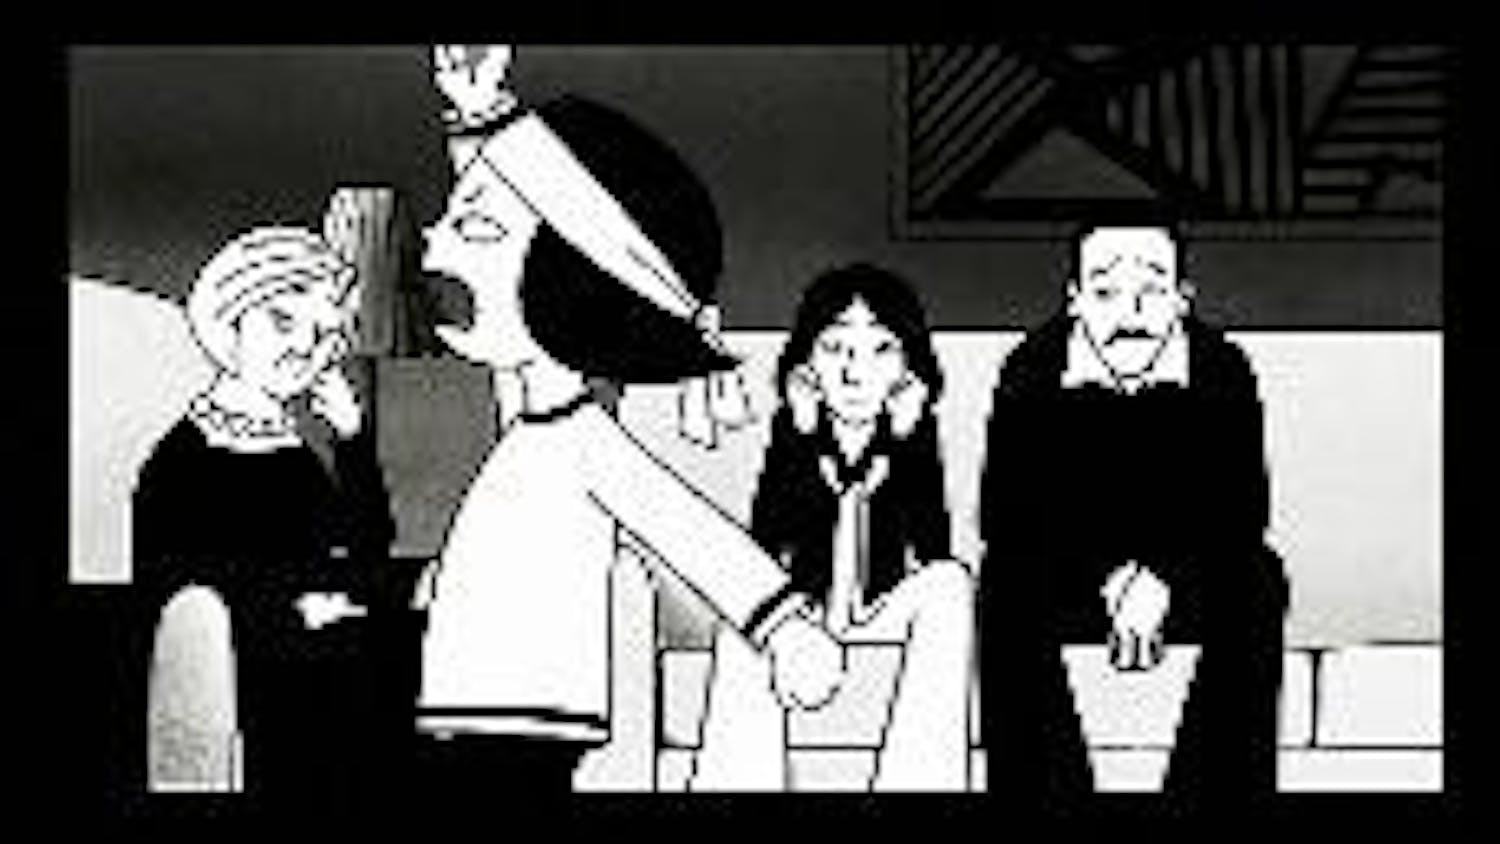 COMIC RELIEF - "Persepolis" stays true to its graphic novel heritage, using 2-D animation unlike many current animated feature films.